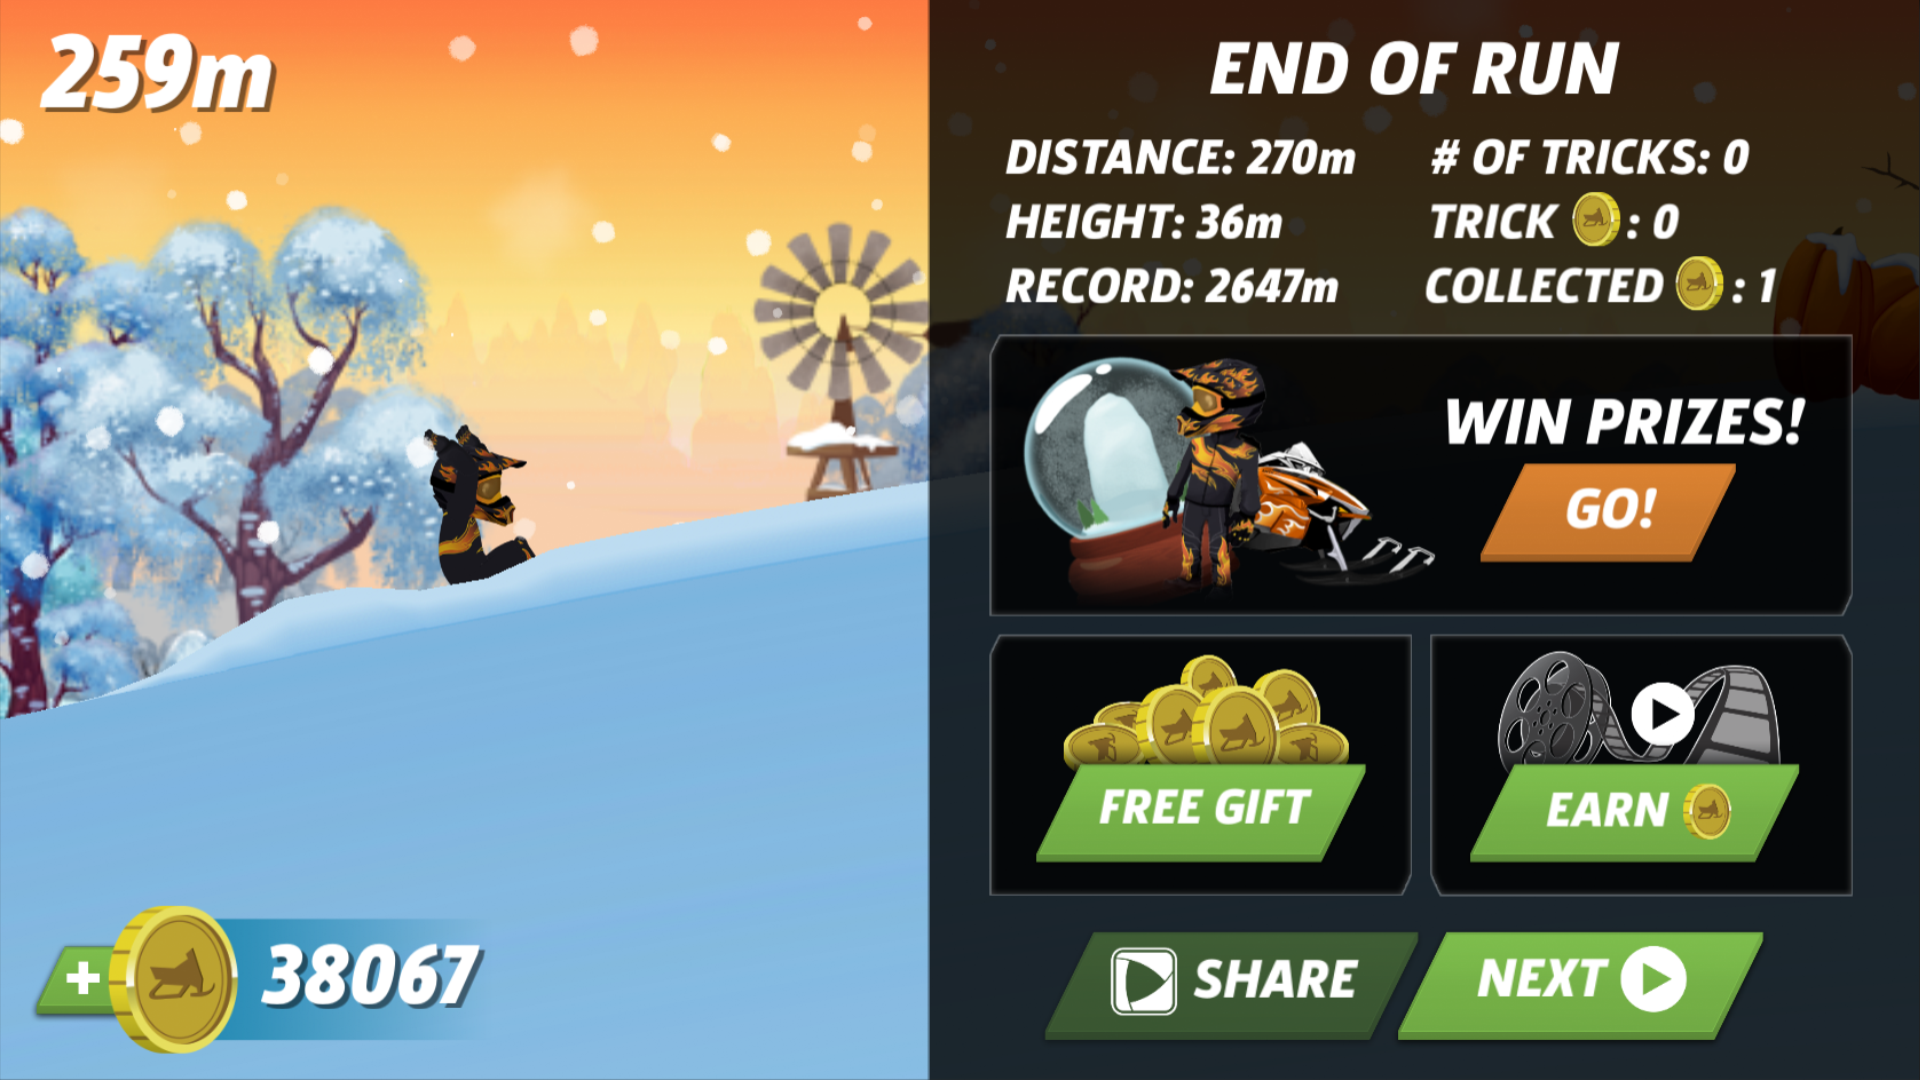 snowmobile games online free